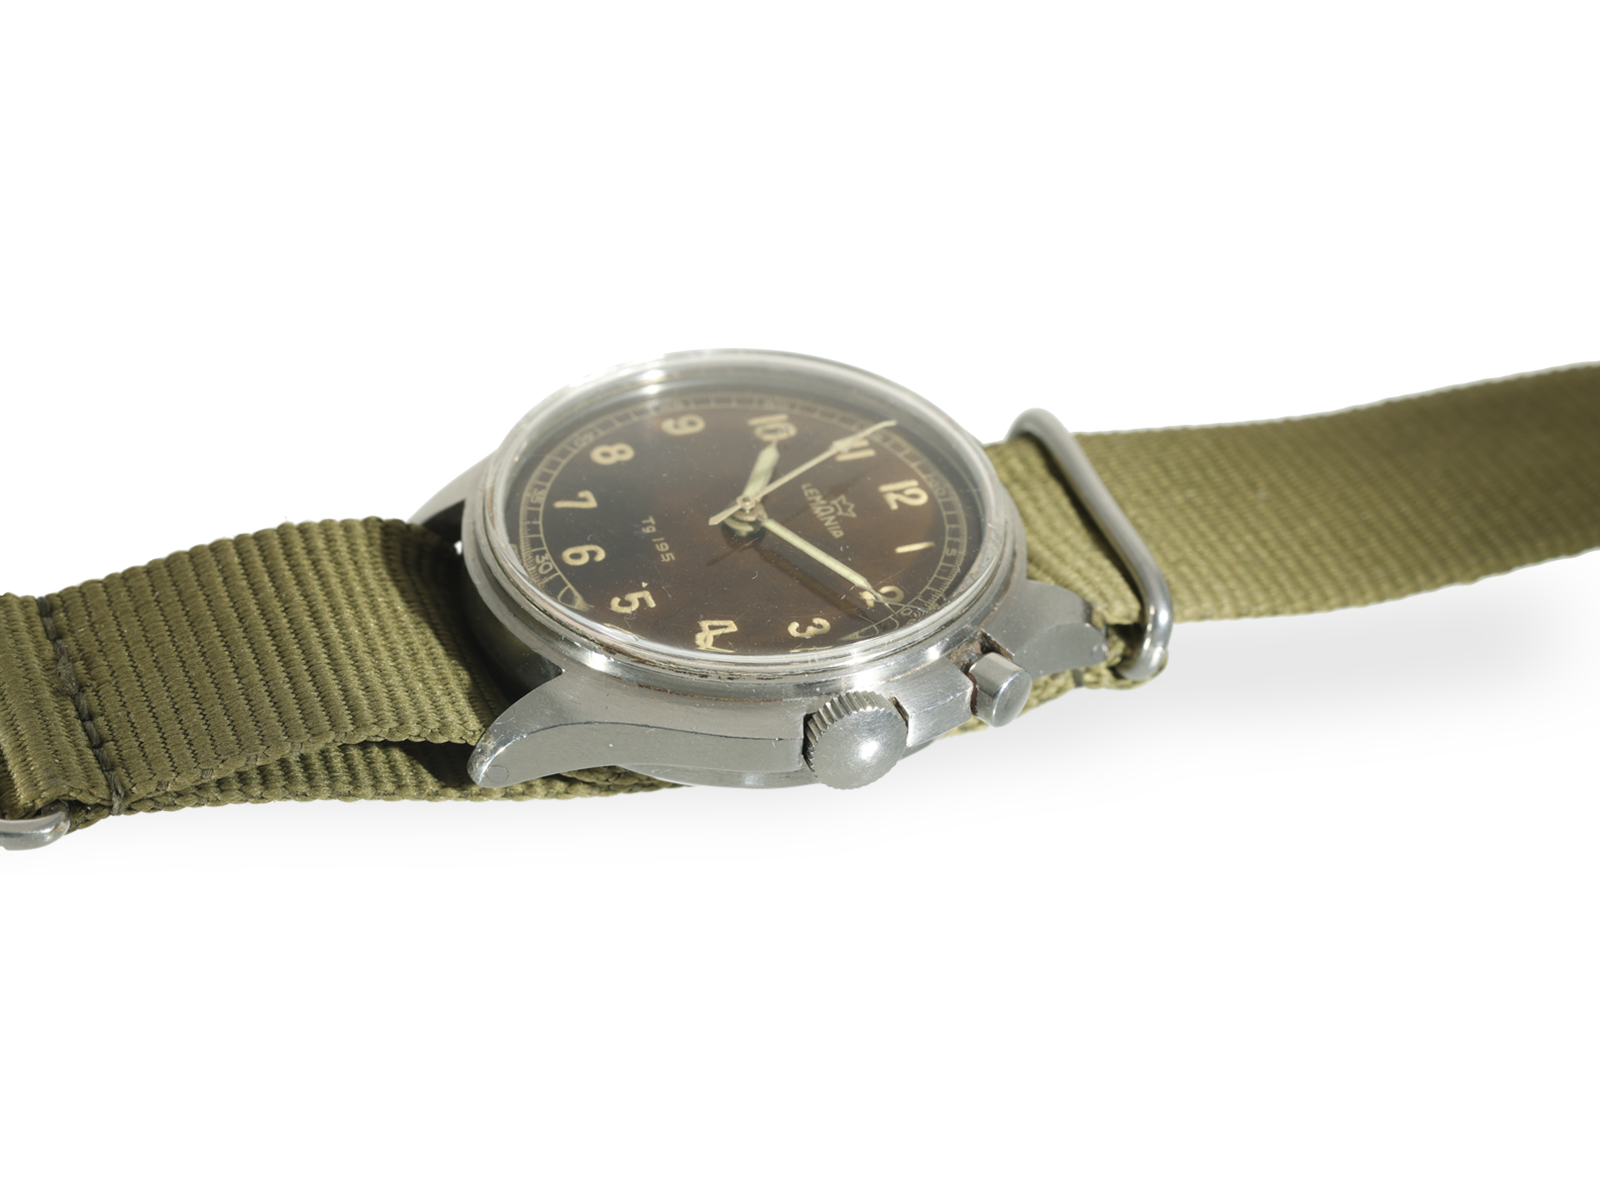 Rare military wristwatch of the Swedish Air Force, Lemania Tg 195 "HACKING SECONDS" "Tropical Dial", - Image 3 of 5